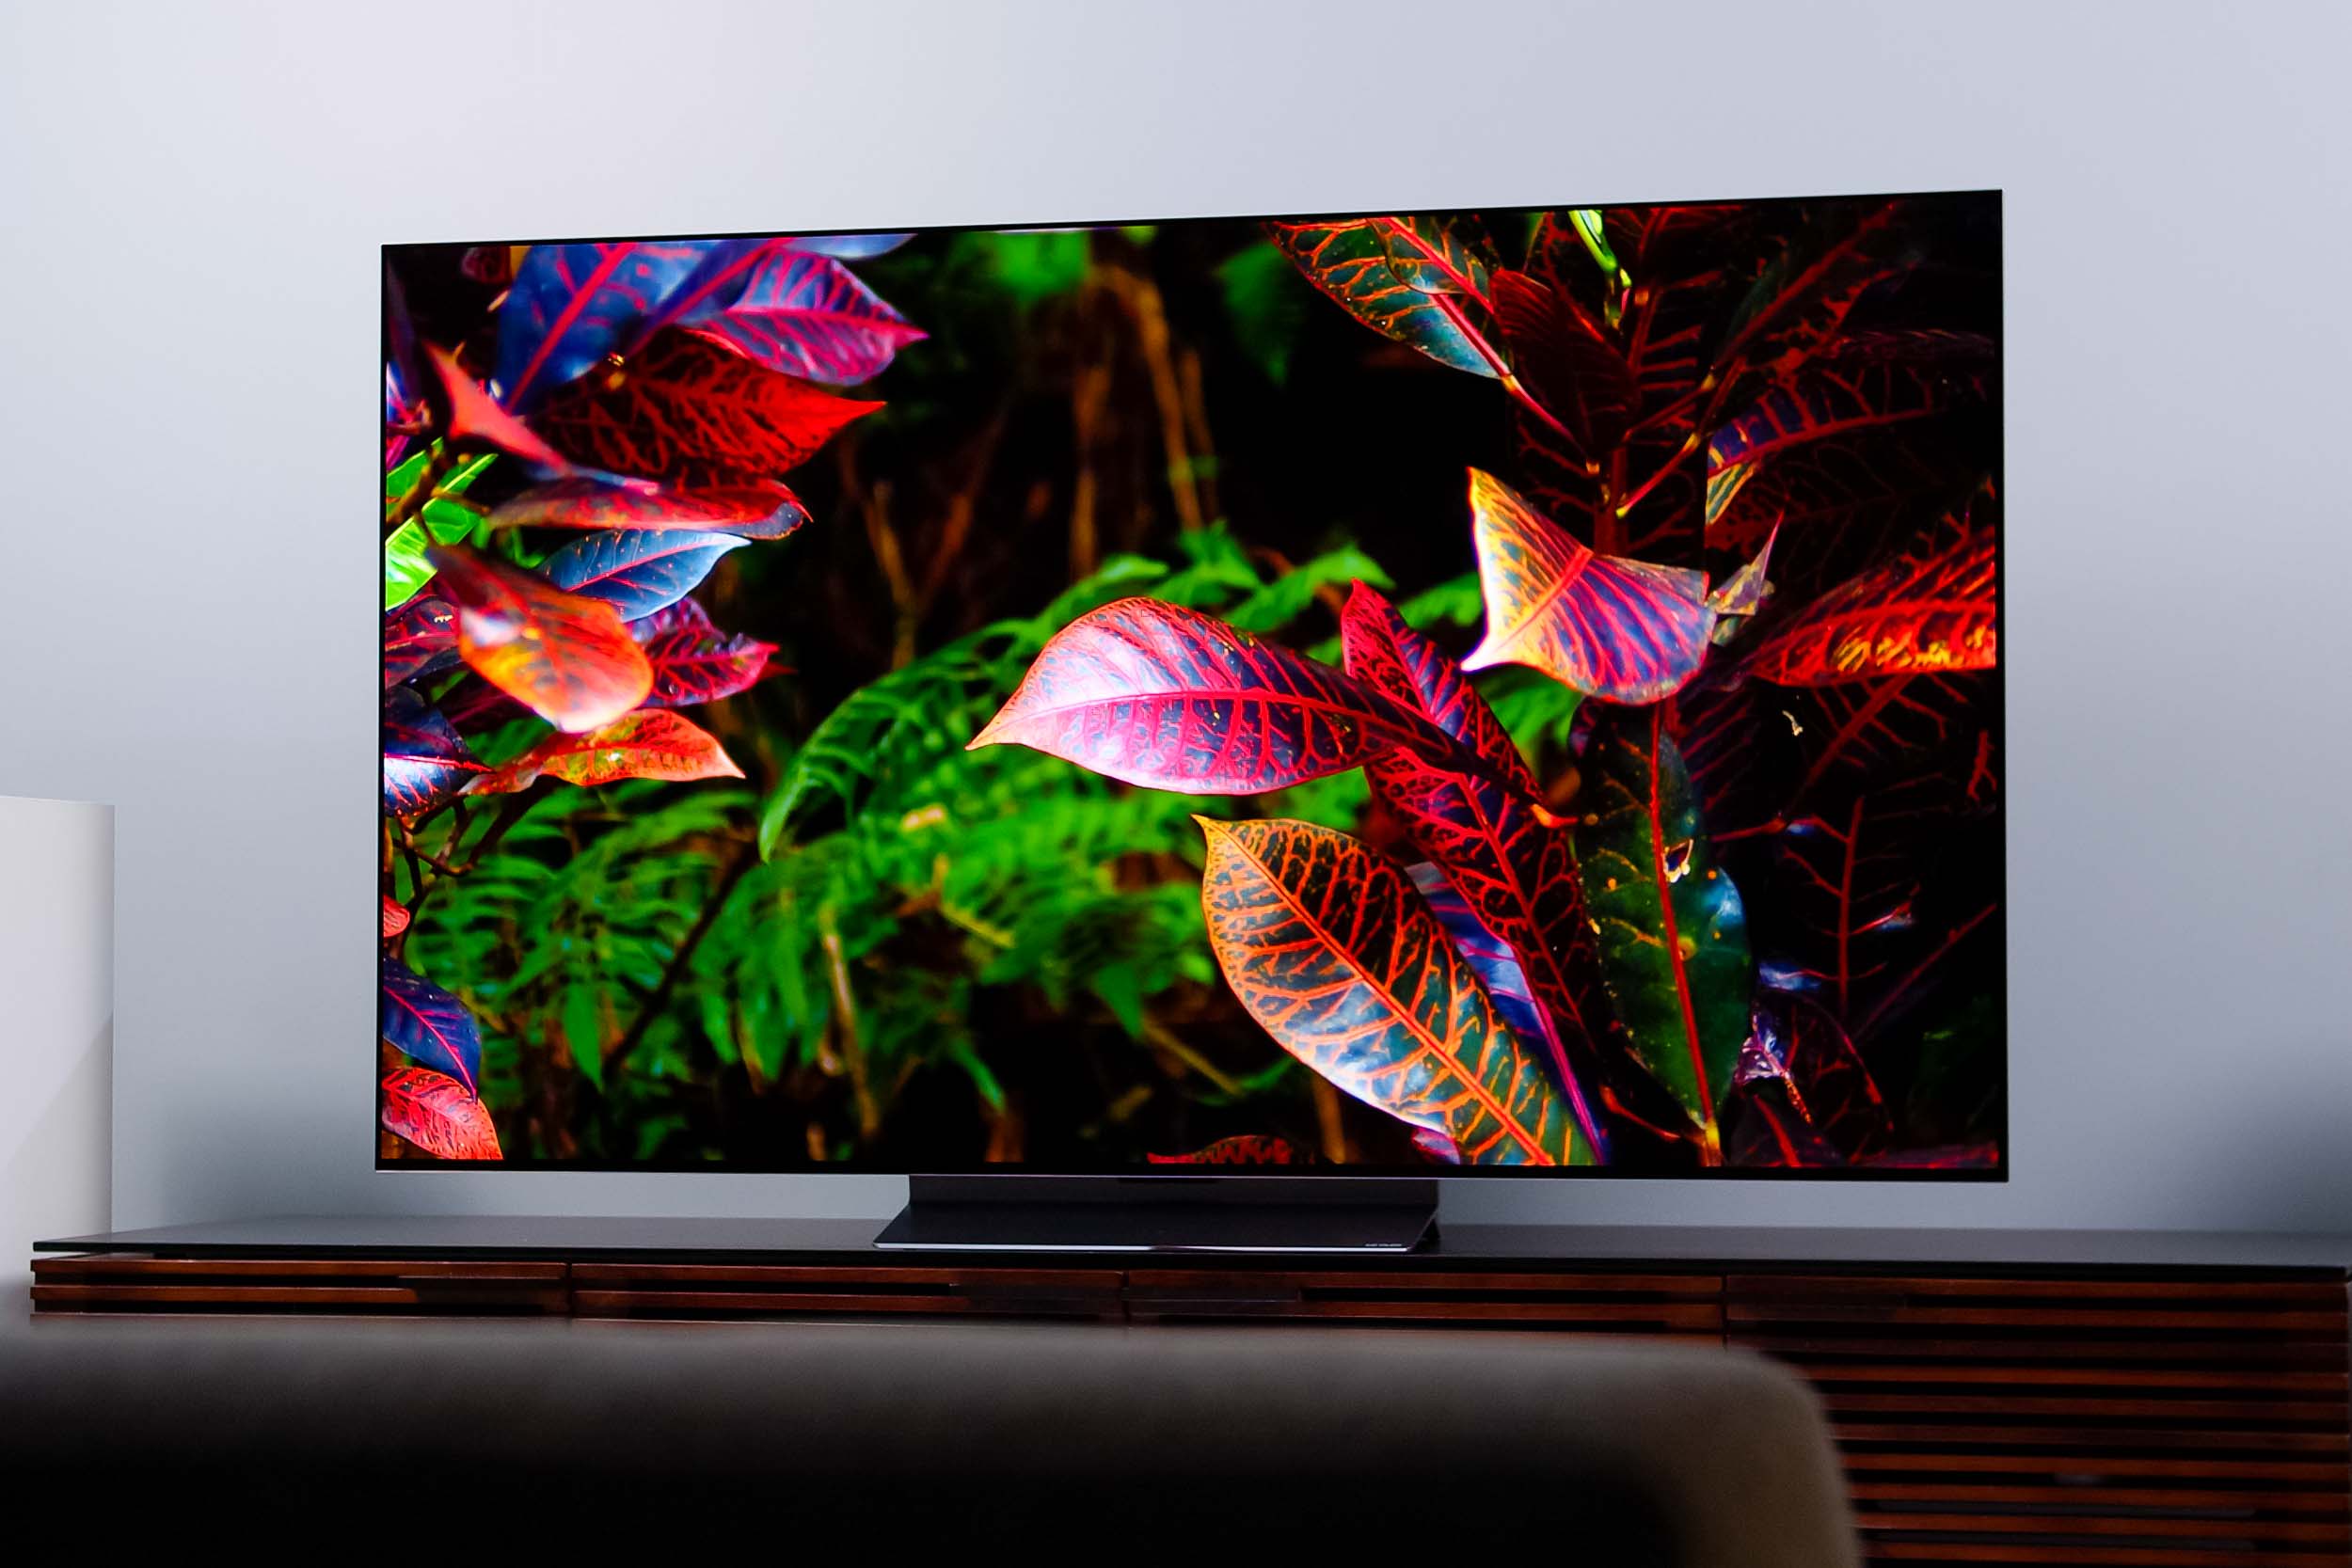 LG C2 (OLED65C2) review: the best OLED TV for most people